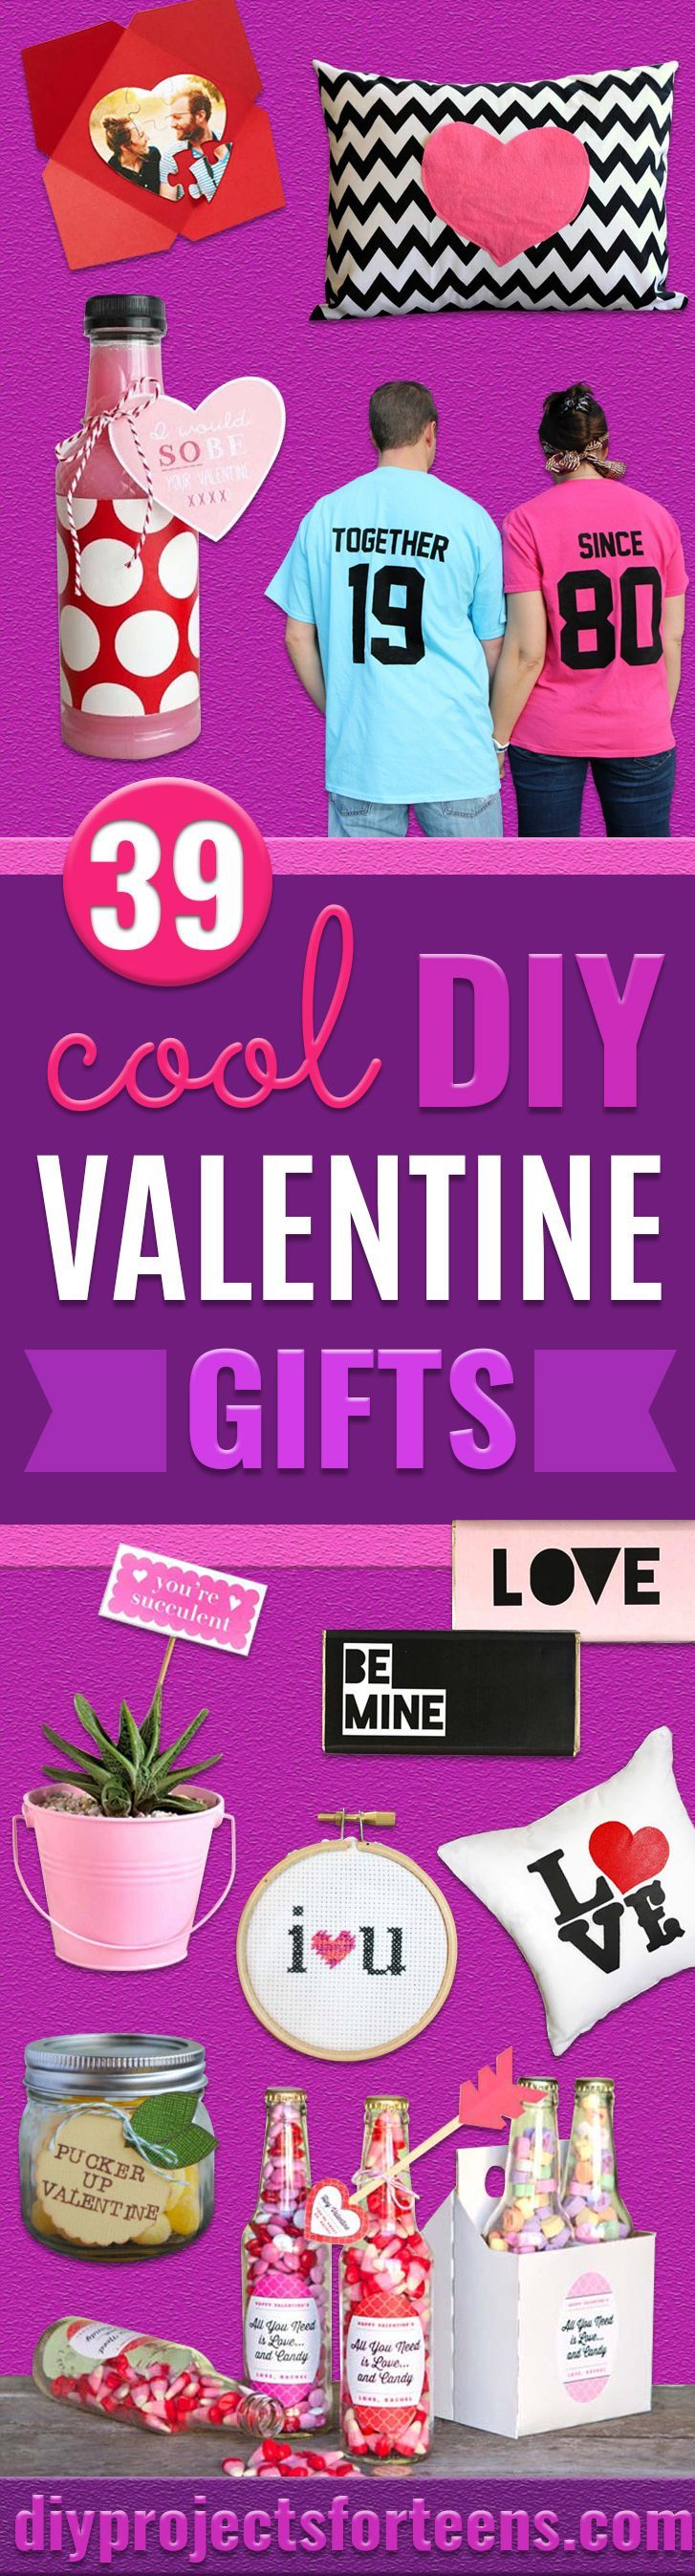 DIY Valentine Gifts - Gifts for Her and Him, Teens, Teenagers and Tweens - Mason Jar Ideas, Homemade Cards, Cheap and Easy Gift Ideas for Valentine Presents 